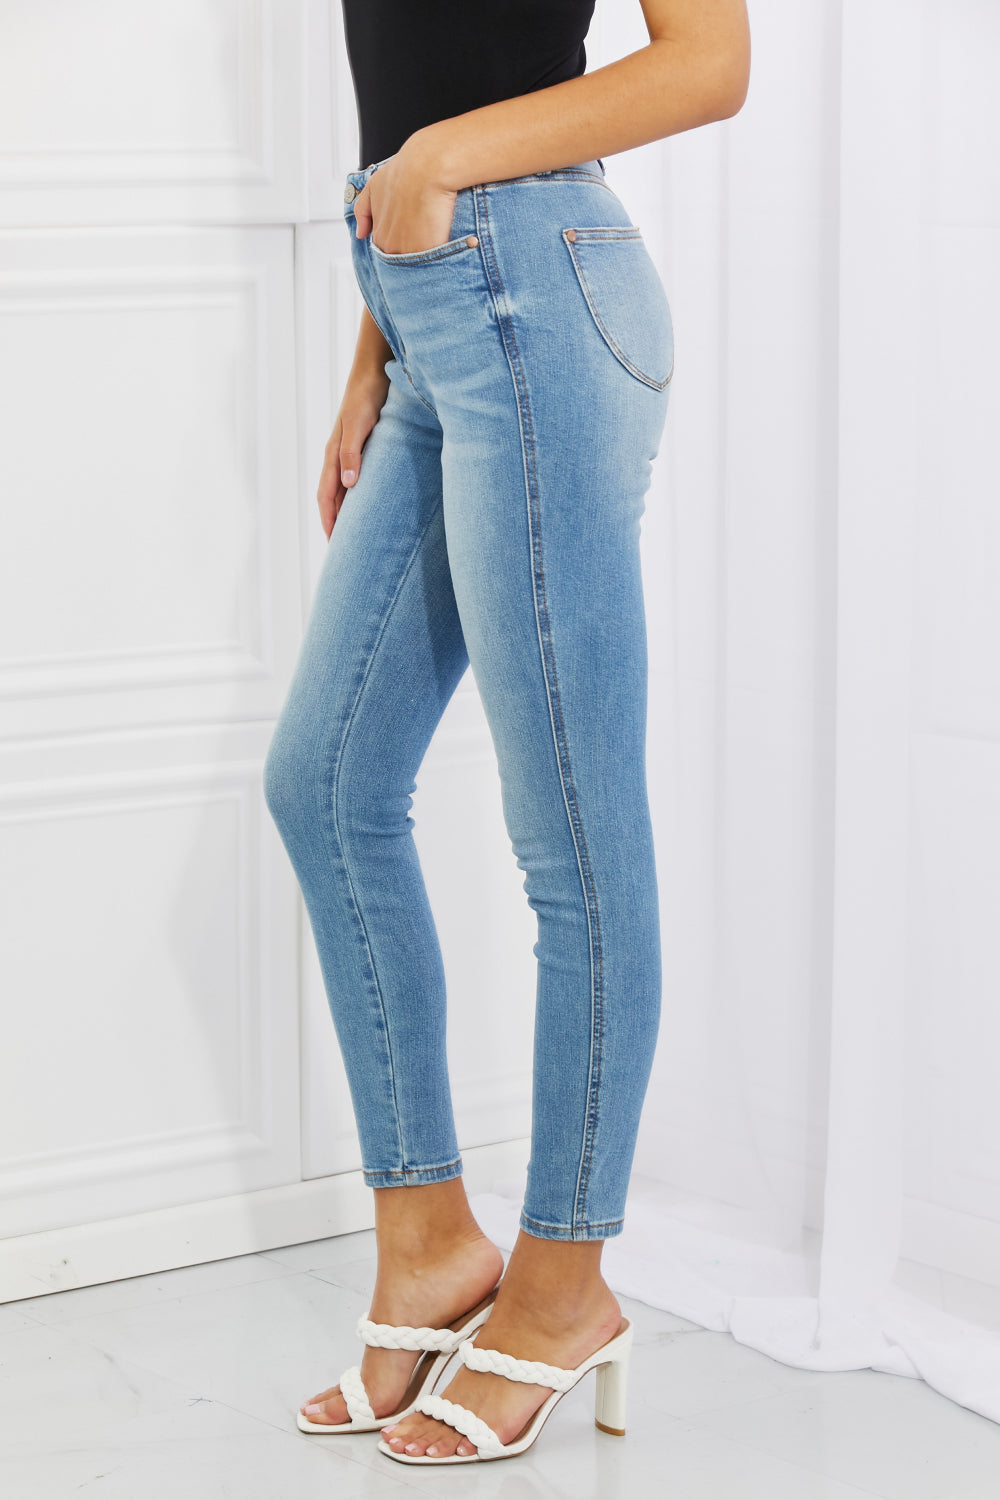 Style #: 88538 High Waist Skinny Jeans Light Wash Judy Blue Womens Misses Juniors Stretchy Jeans Denim